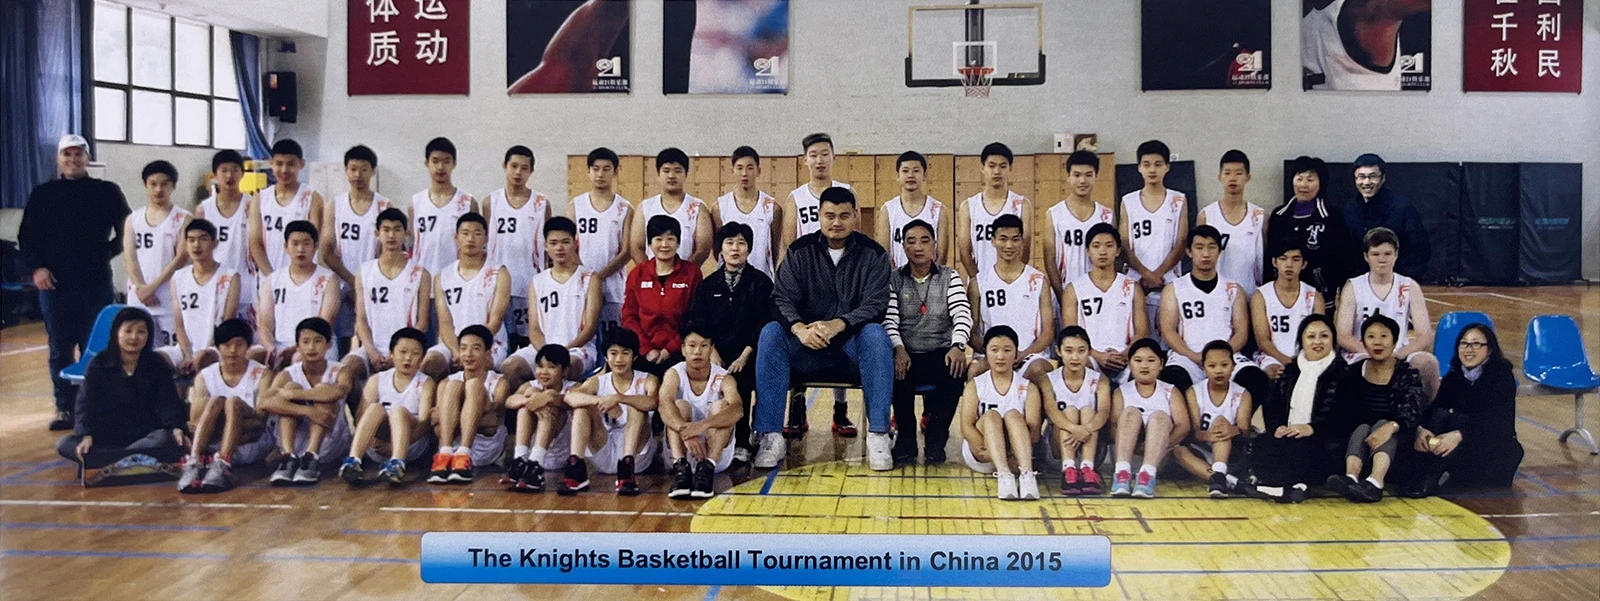 Knights Basketball Tournament in China 2015